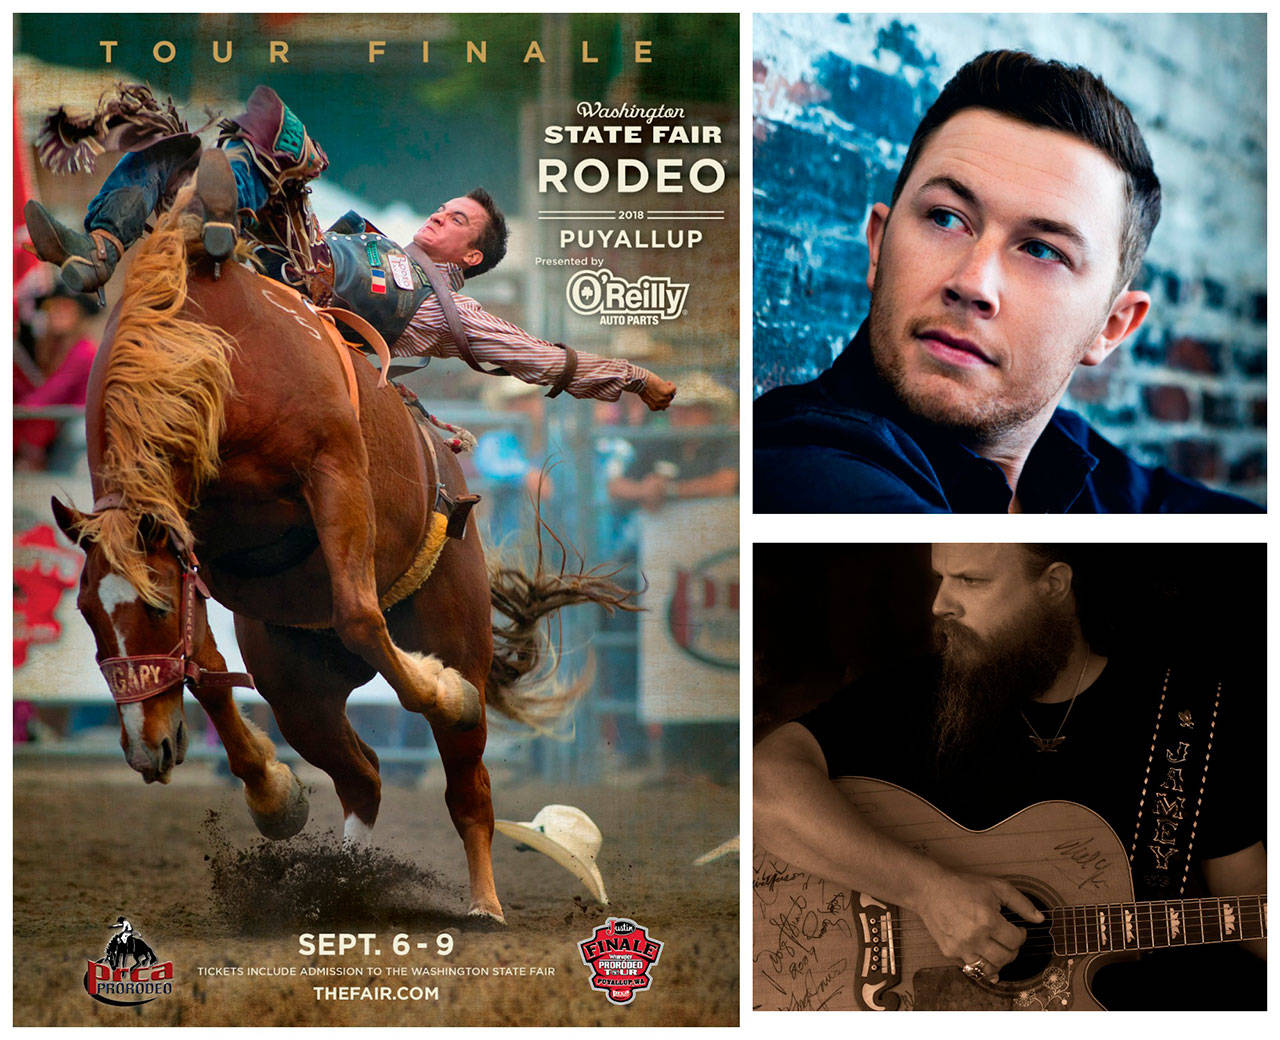 Get ready for thrill-seeking action when the first Wrangler Pro Rodeo Tour Finale presented by Justin Boots performance comes to the Washington State Fair o Sept. 6-9. Country music’s Scotty McCreery, upper right, and Jamey Johnson, below right, perform Sept. 8 and 9. COURTESY PHOTO